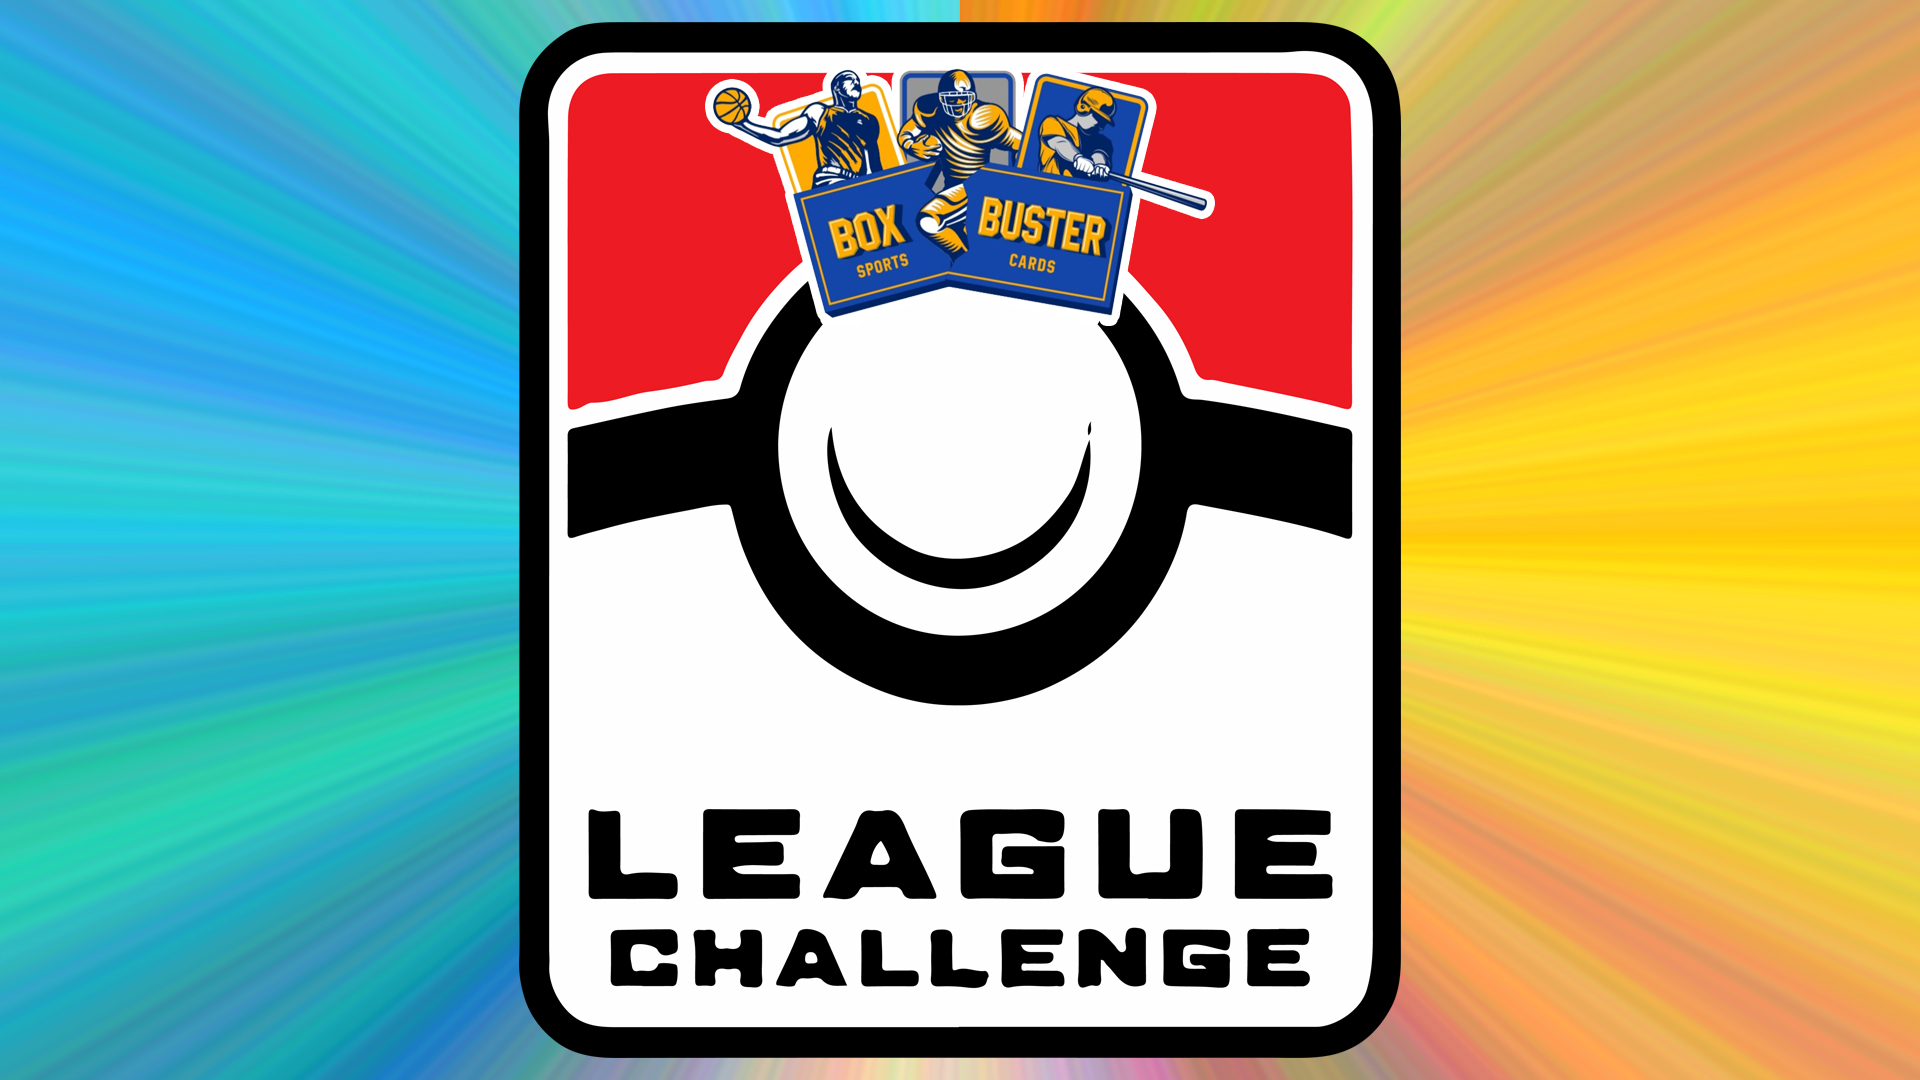 Pokemon League Challenge at Box Buster Sports Cards in Montrose, CO